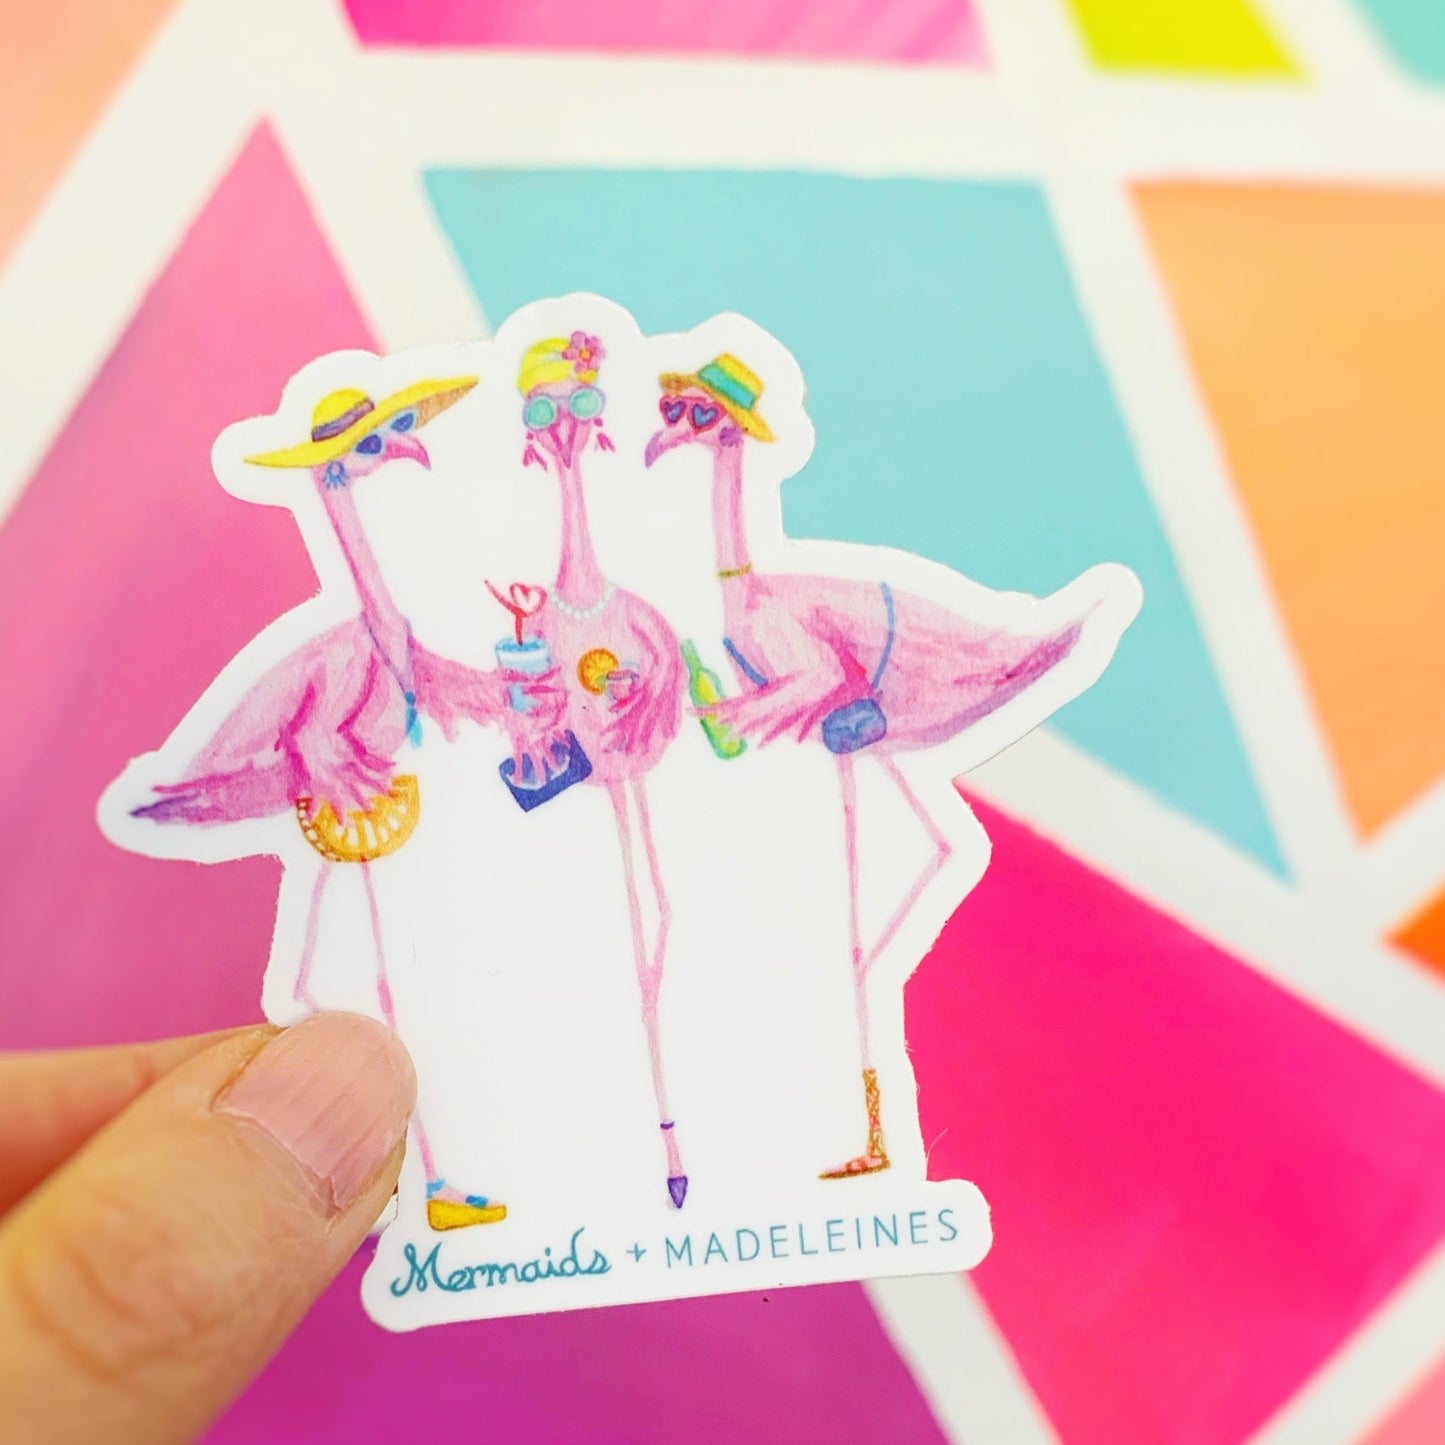 The flamingal sticker is created from original artwork made with acrylic paint and marker its 3 flamingo ladies dressed in summer hats and various footwear. This is a picture of one sticker being held up in front of a bright neon mural